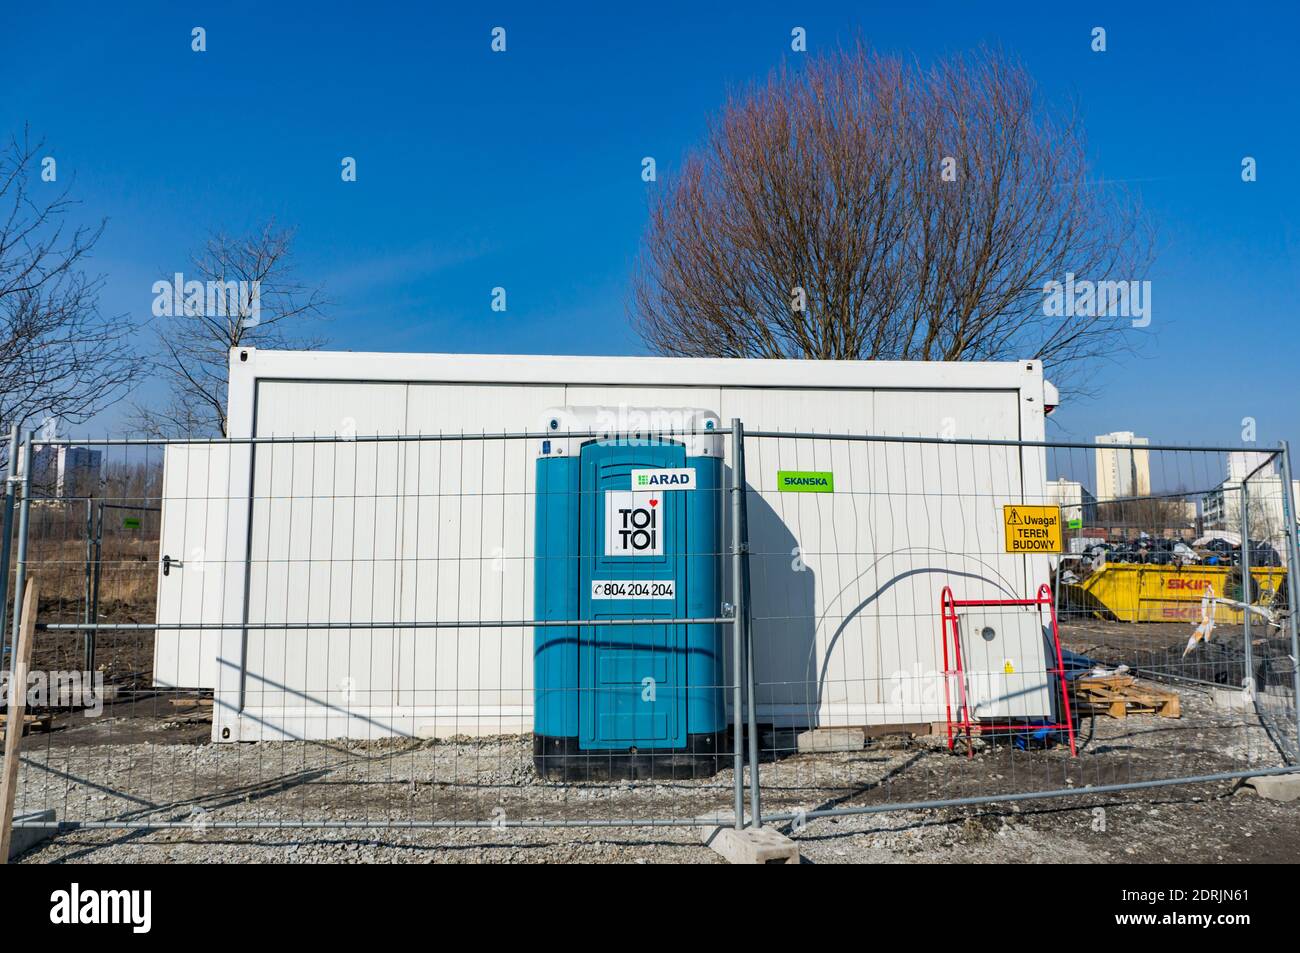 POZNAN, POLAND - Mar 11, 2018: Toi Toi portable toilet and container on a construction area behind a metal fence Stock Photo